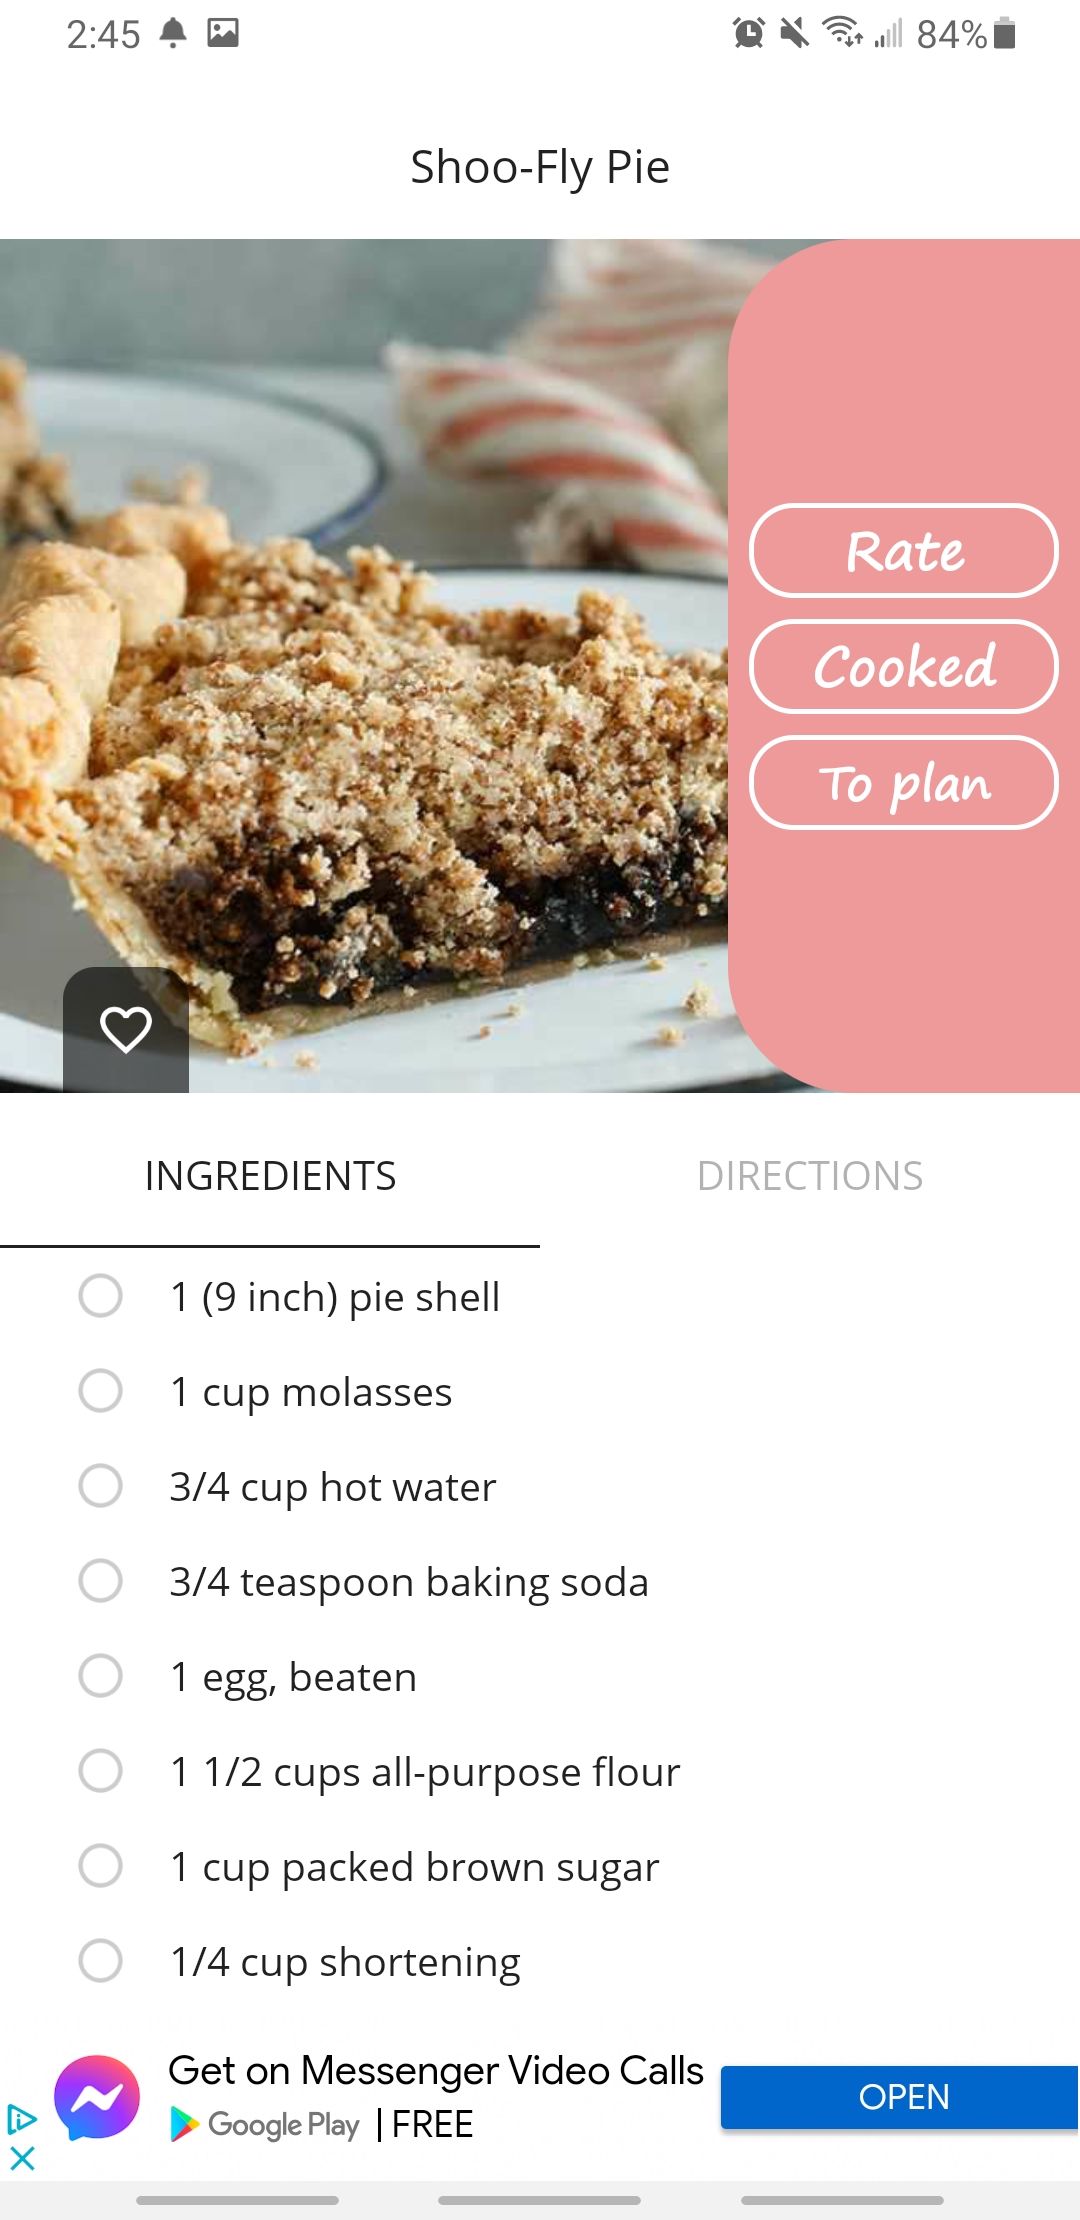 cake and baking recipes app ingredients for shoo fly pie